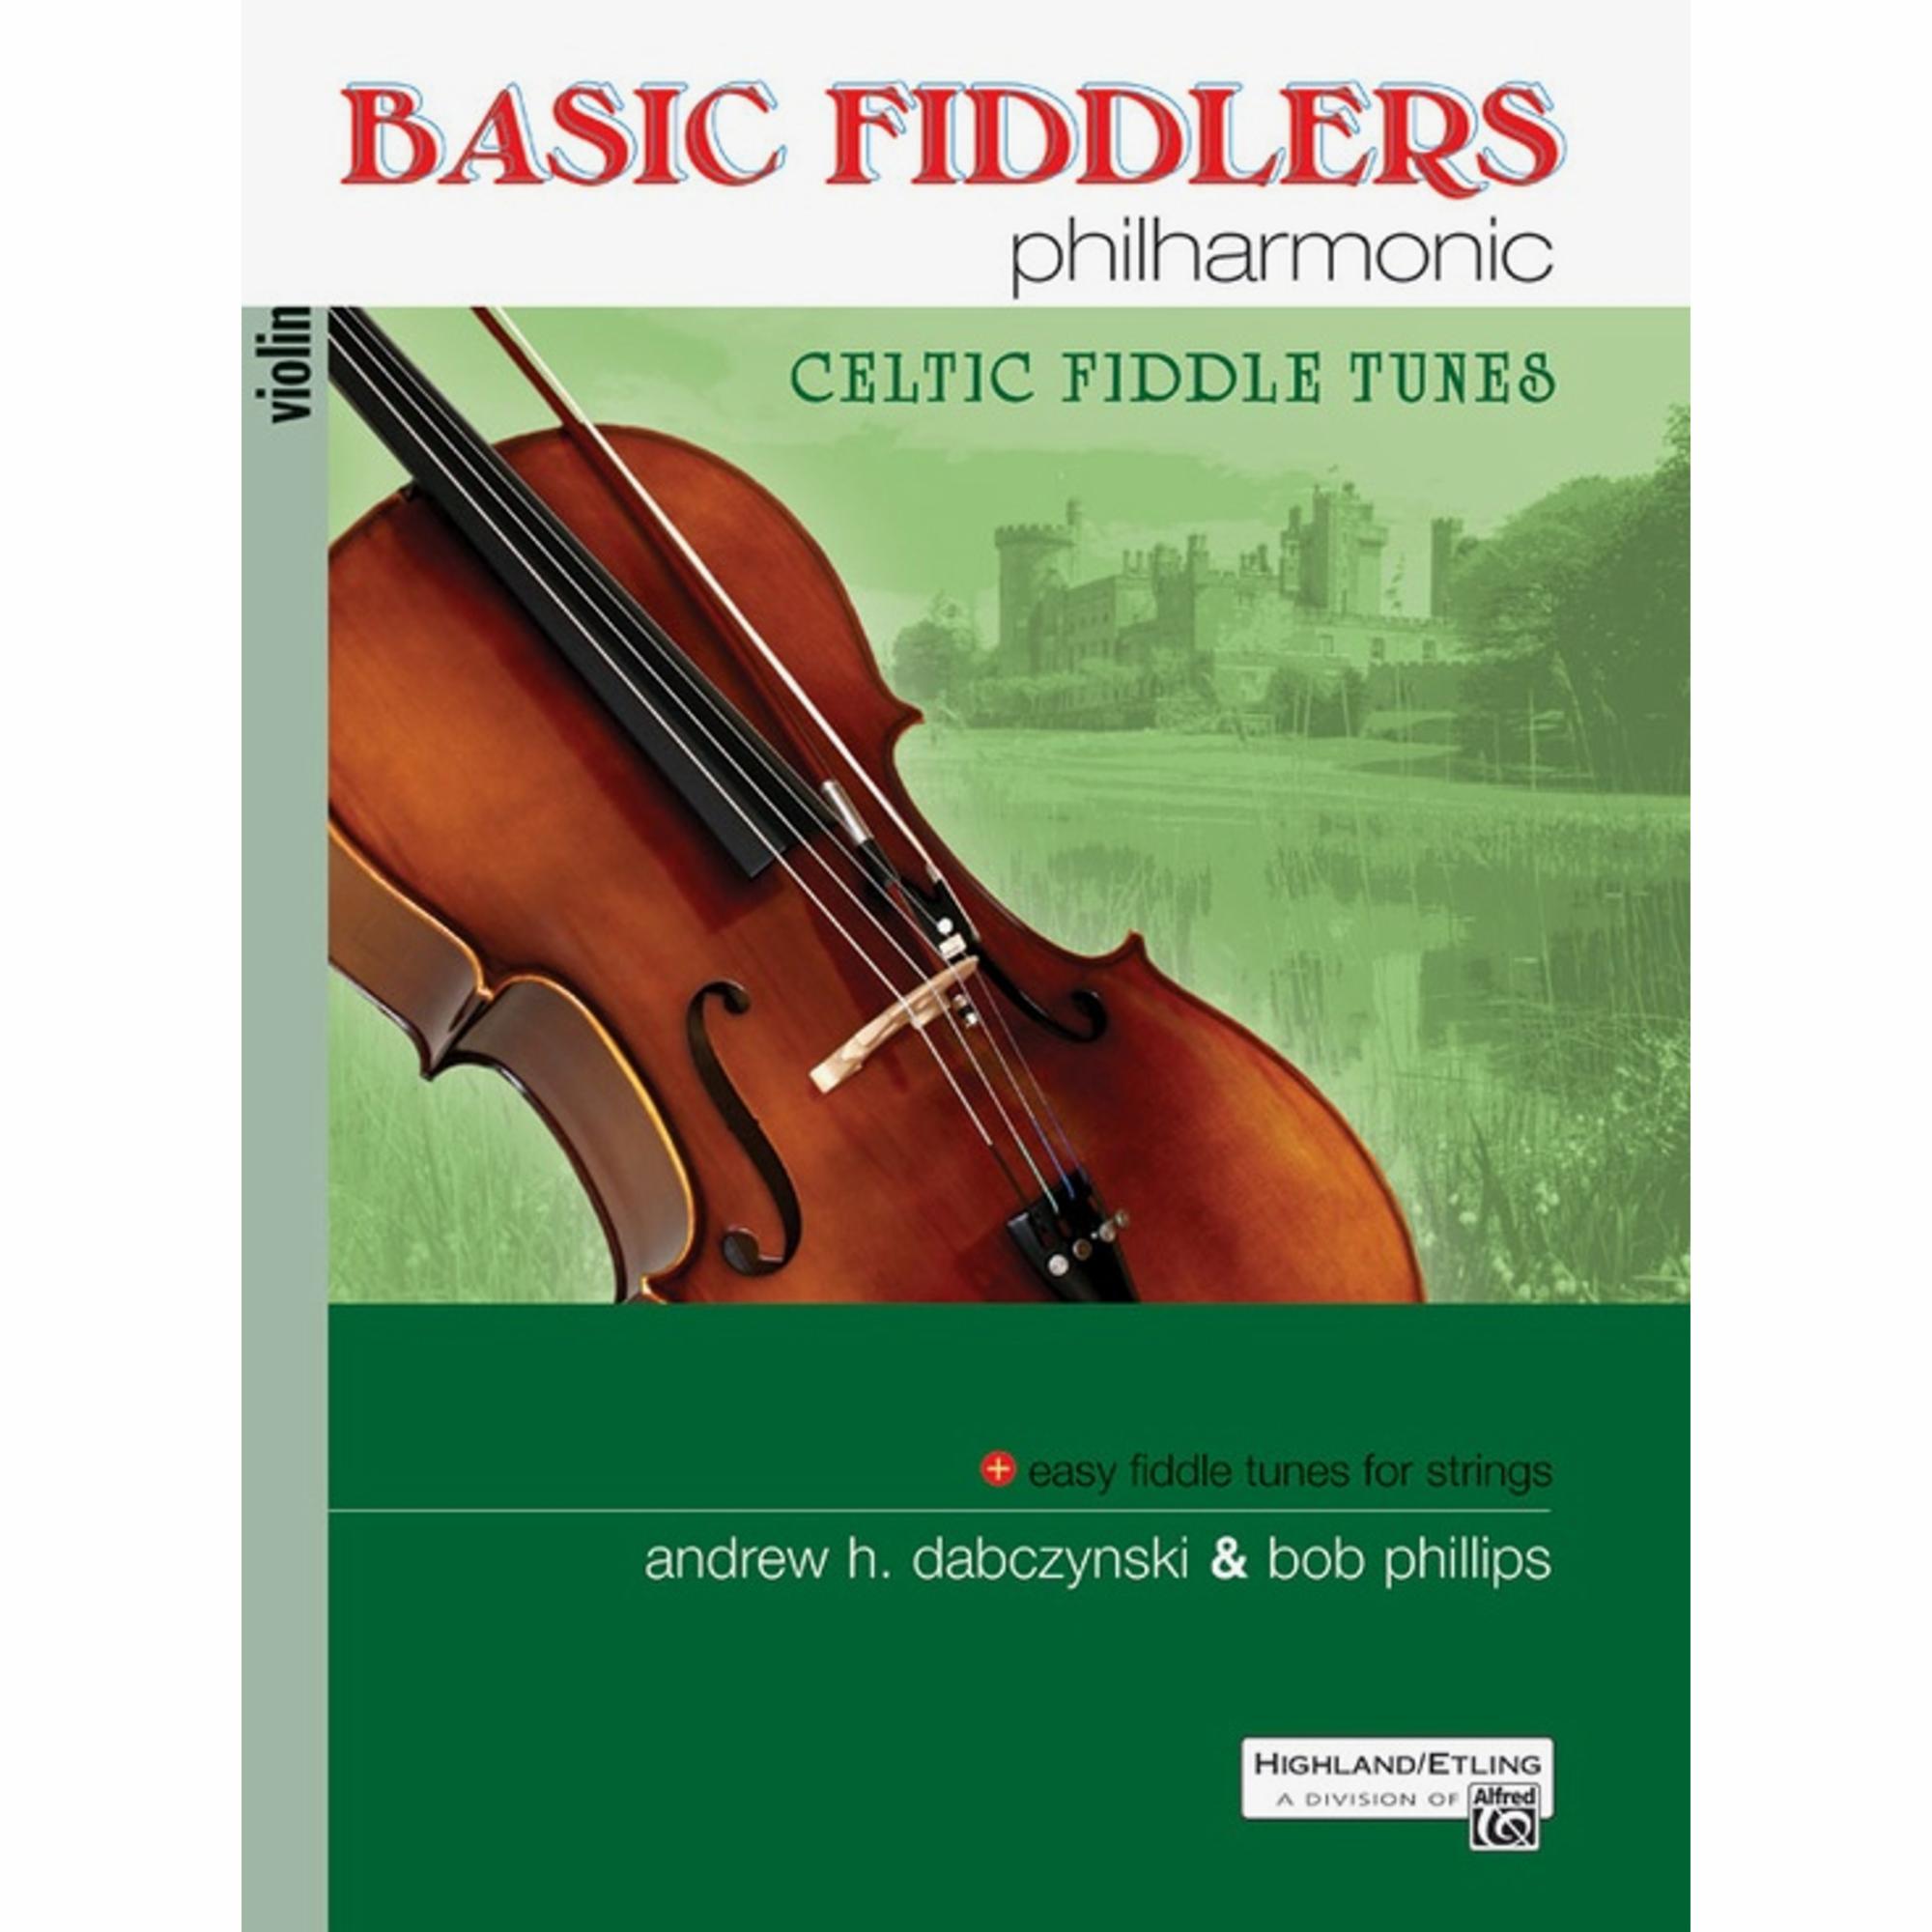 Basic Fiddlers Philharmonic: Celtic Fiddle Tunes for Strings